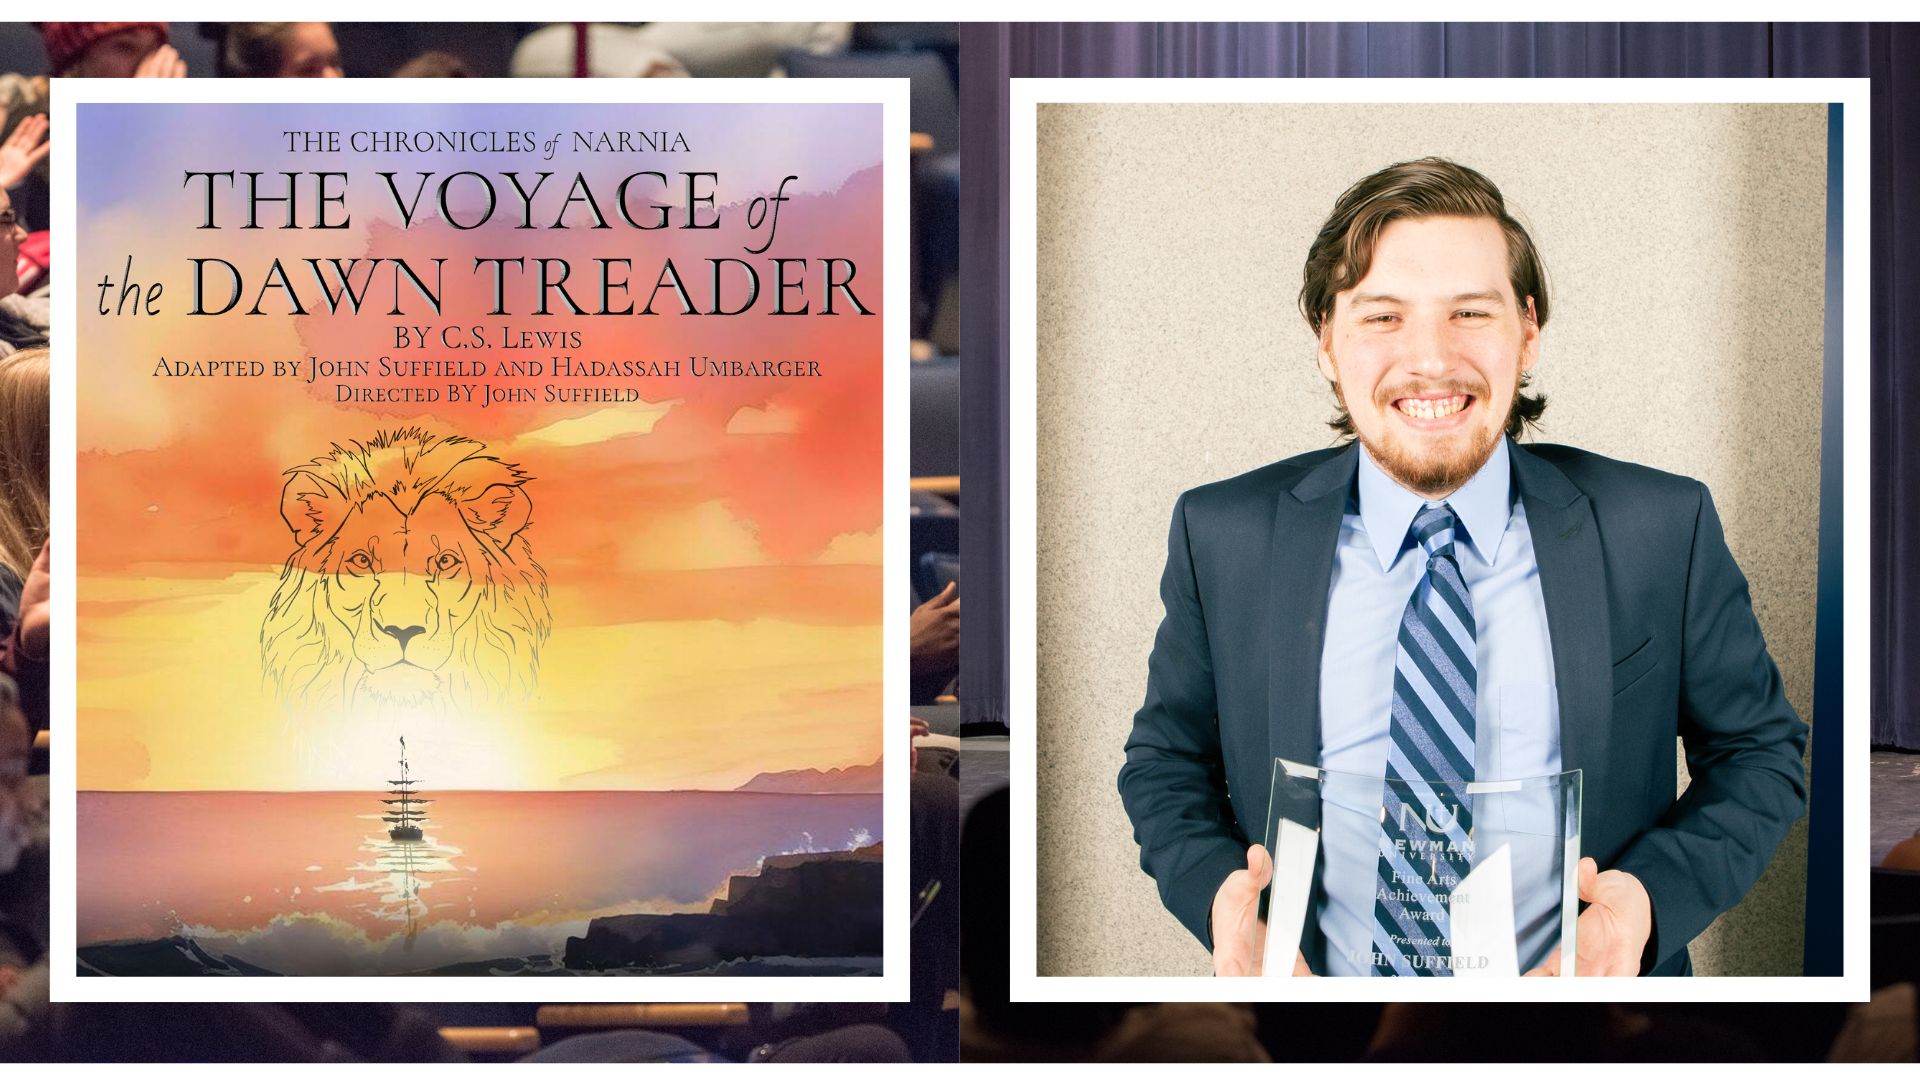 "The Voyage of Dawn Treader" with John Suffield